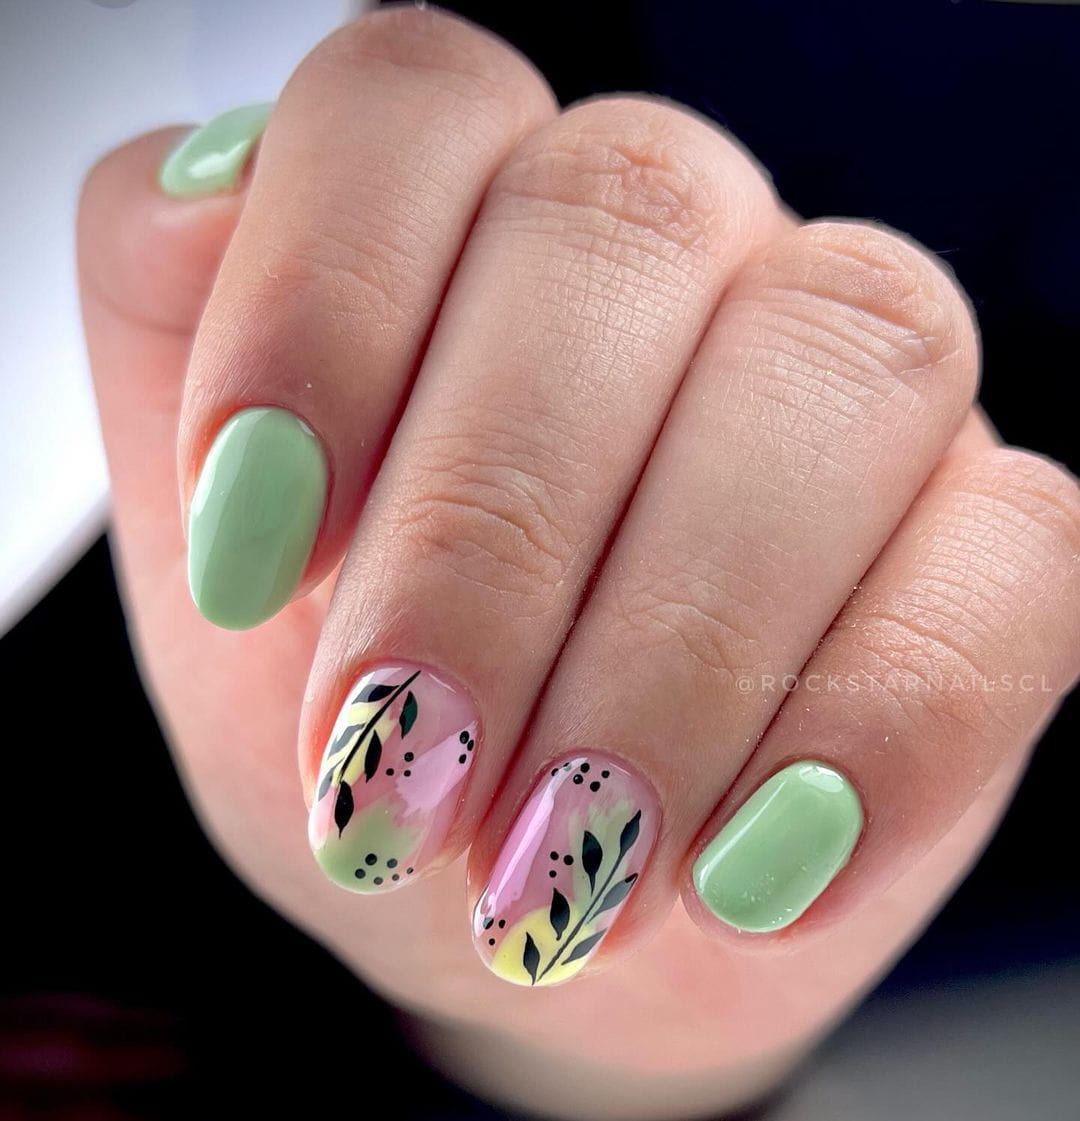 100+ Short Nail Designs You’ll Want To Try This Year images 9